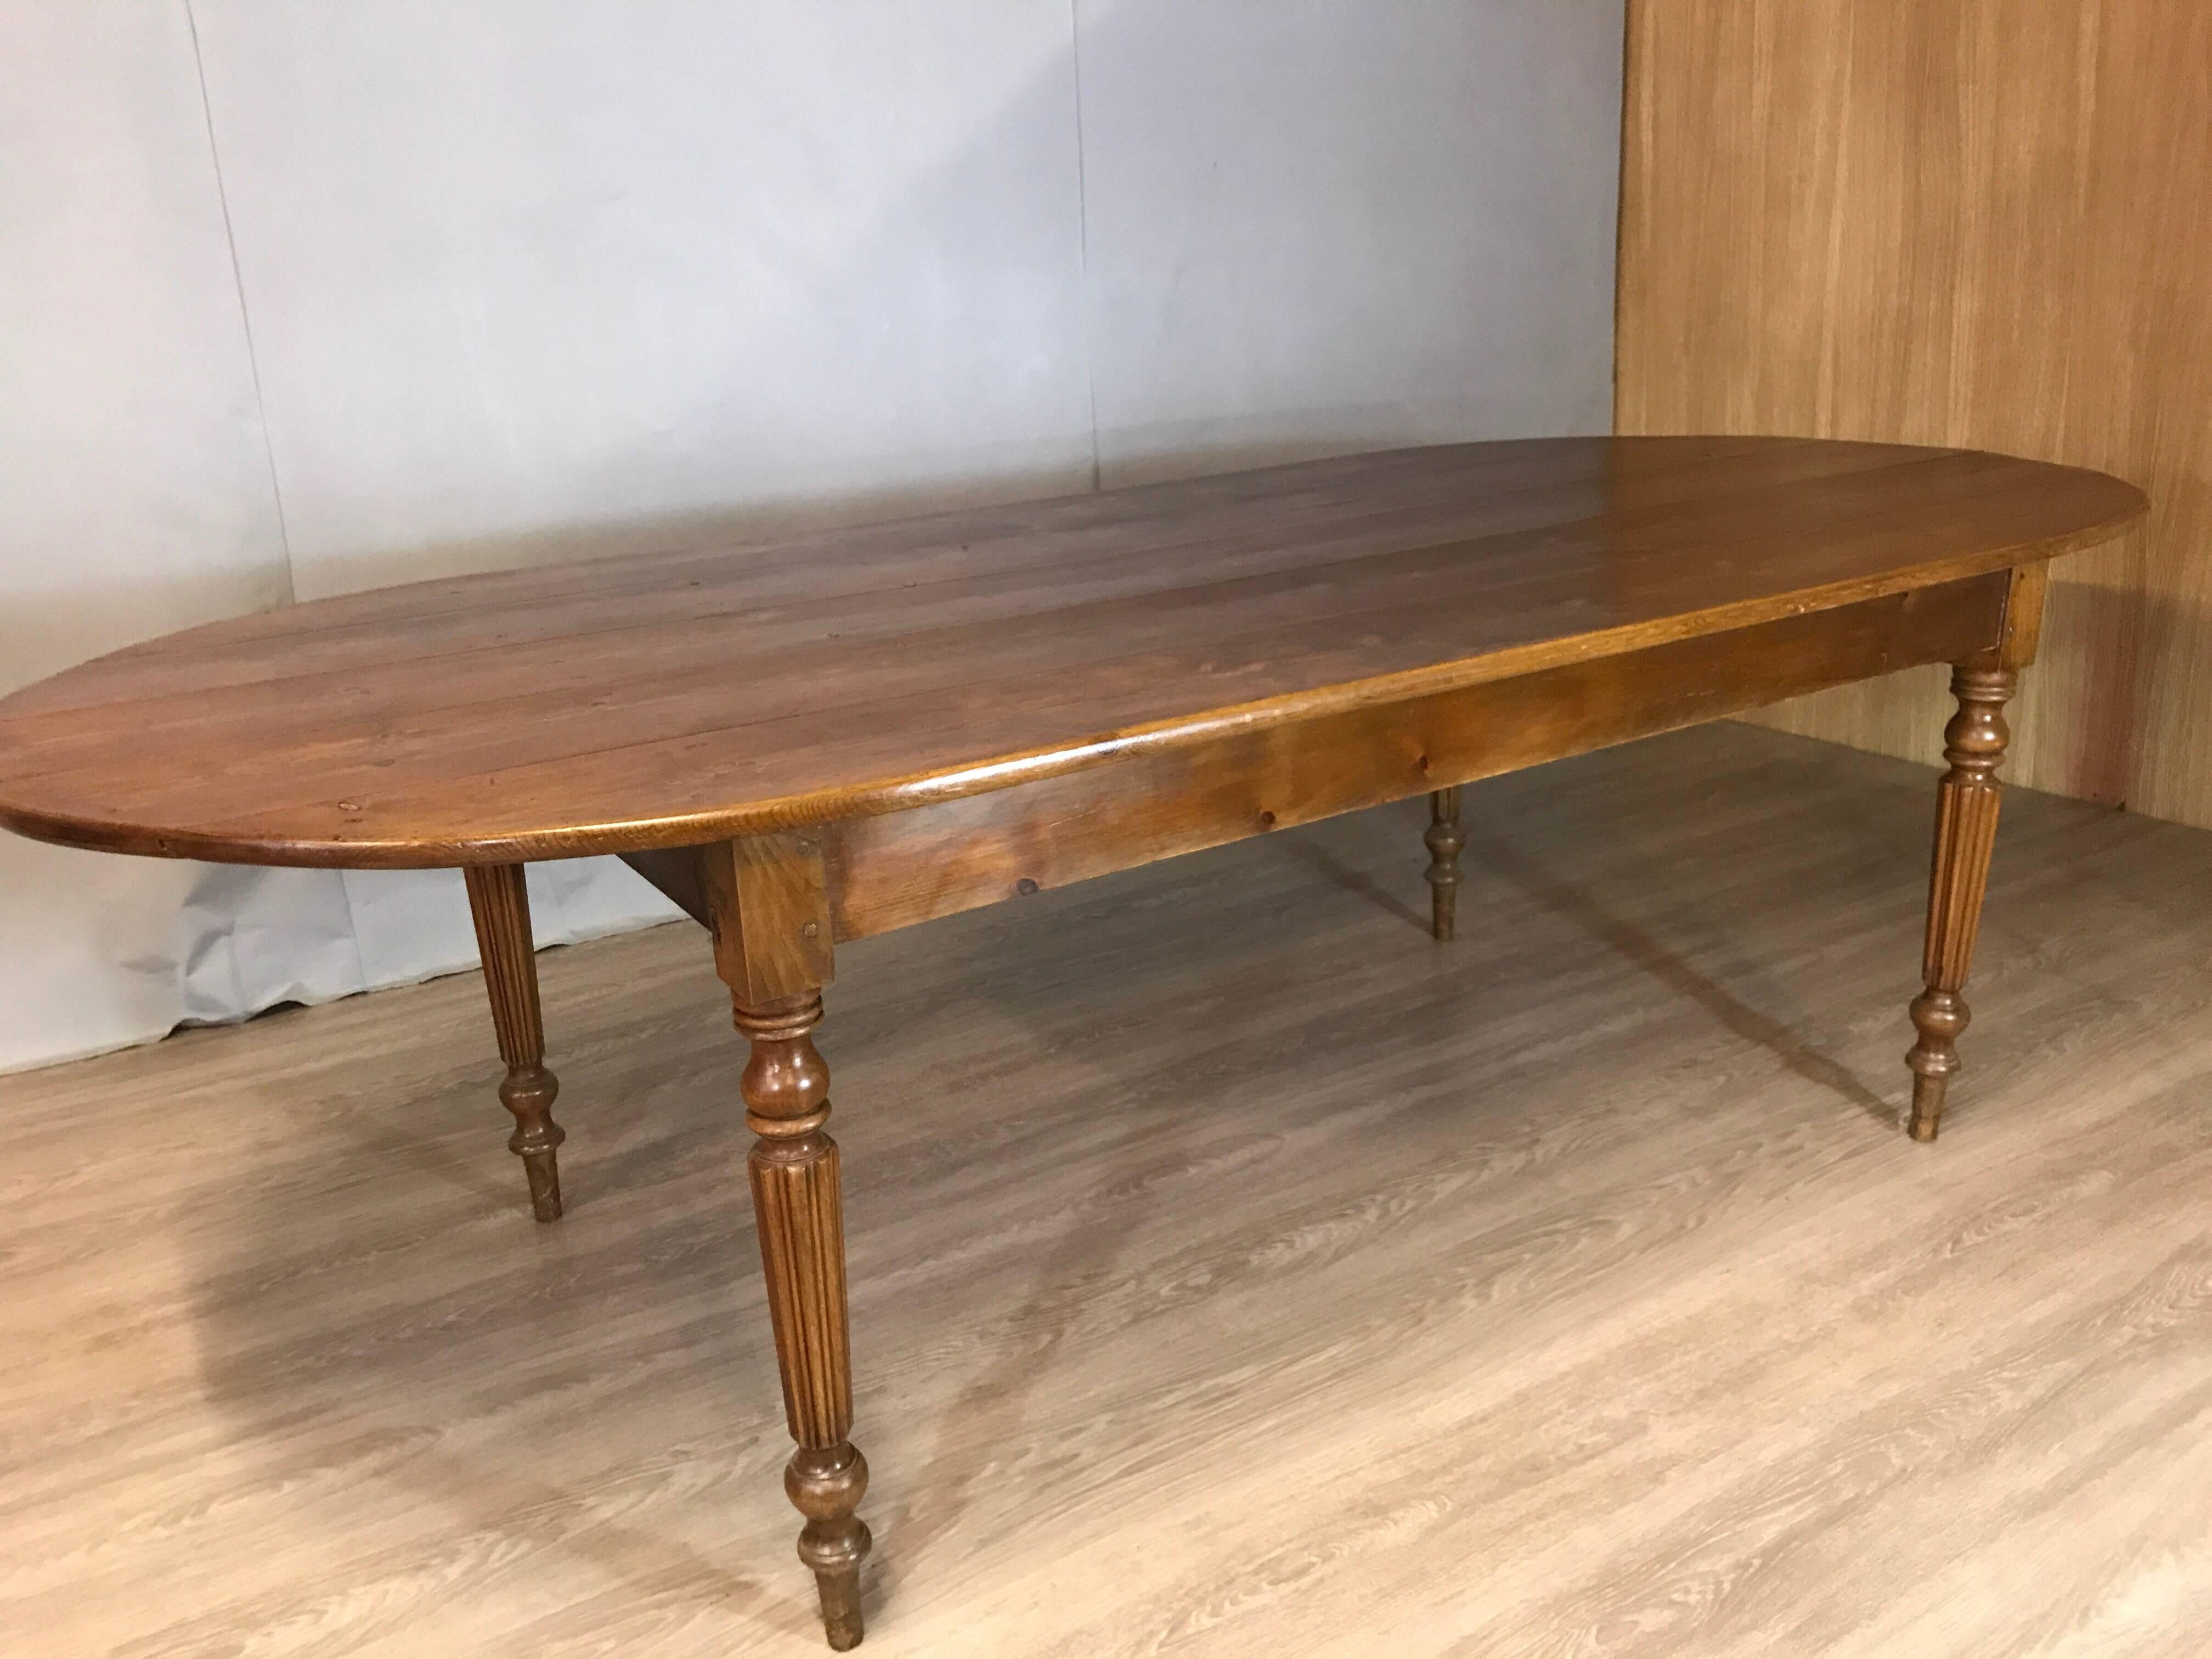 Antique pine table with oval ends and lovely warm beech turned and fluted legs. Wonderful width table and would comfortably seat 8/10 people.